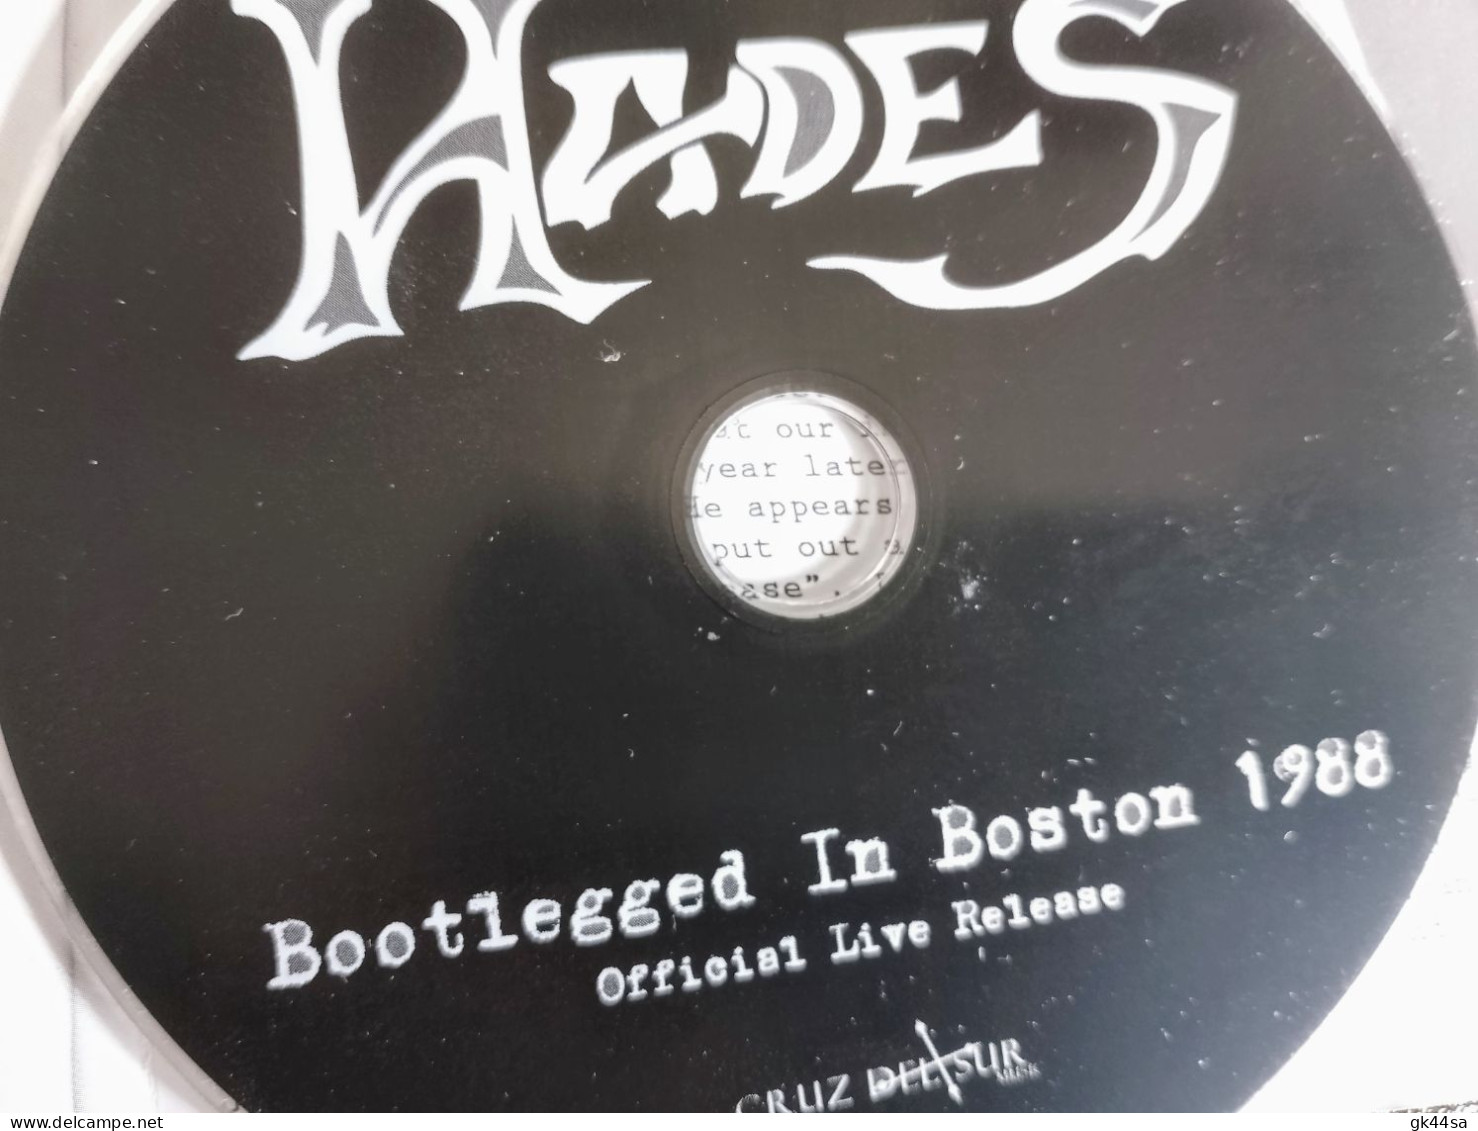 HADES - BOOTLEGGED IN BOSTON 1988 - OFFICIAL LIVE RELEASE - DVD - DVD Musicali